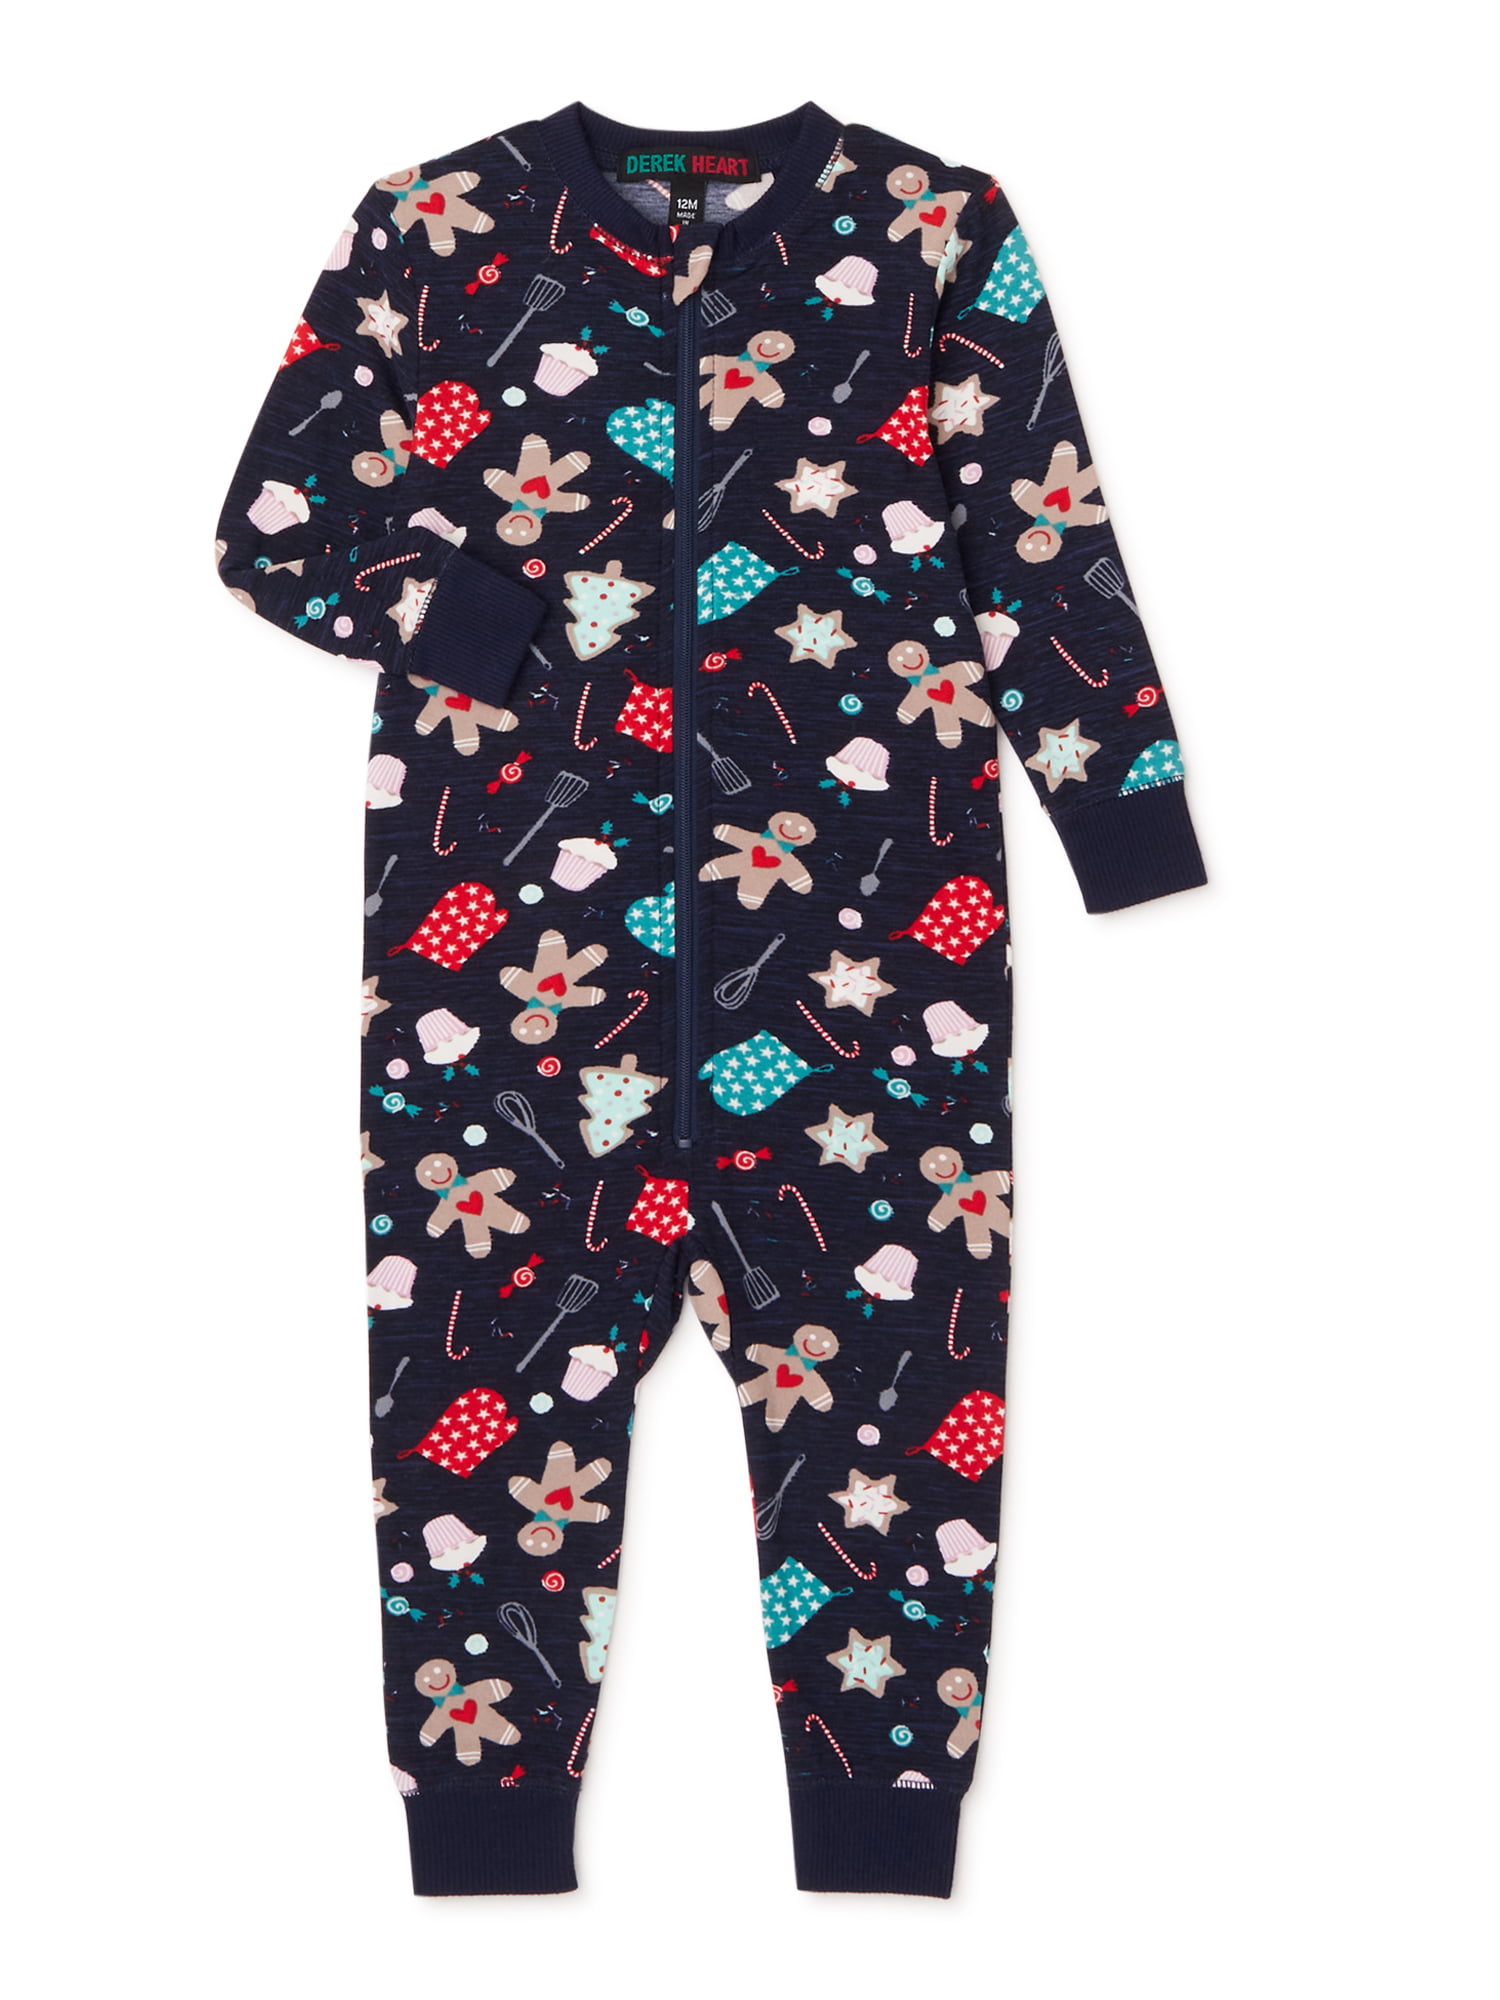 Matching Family Christmas 1Onesie Fleece All in One Pyjamas Xmas Outfits UK 